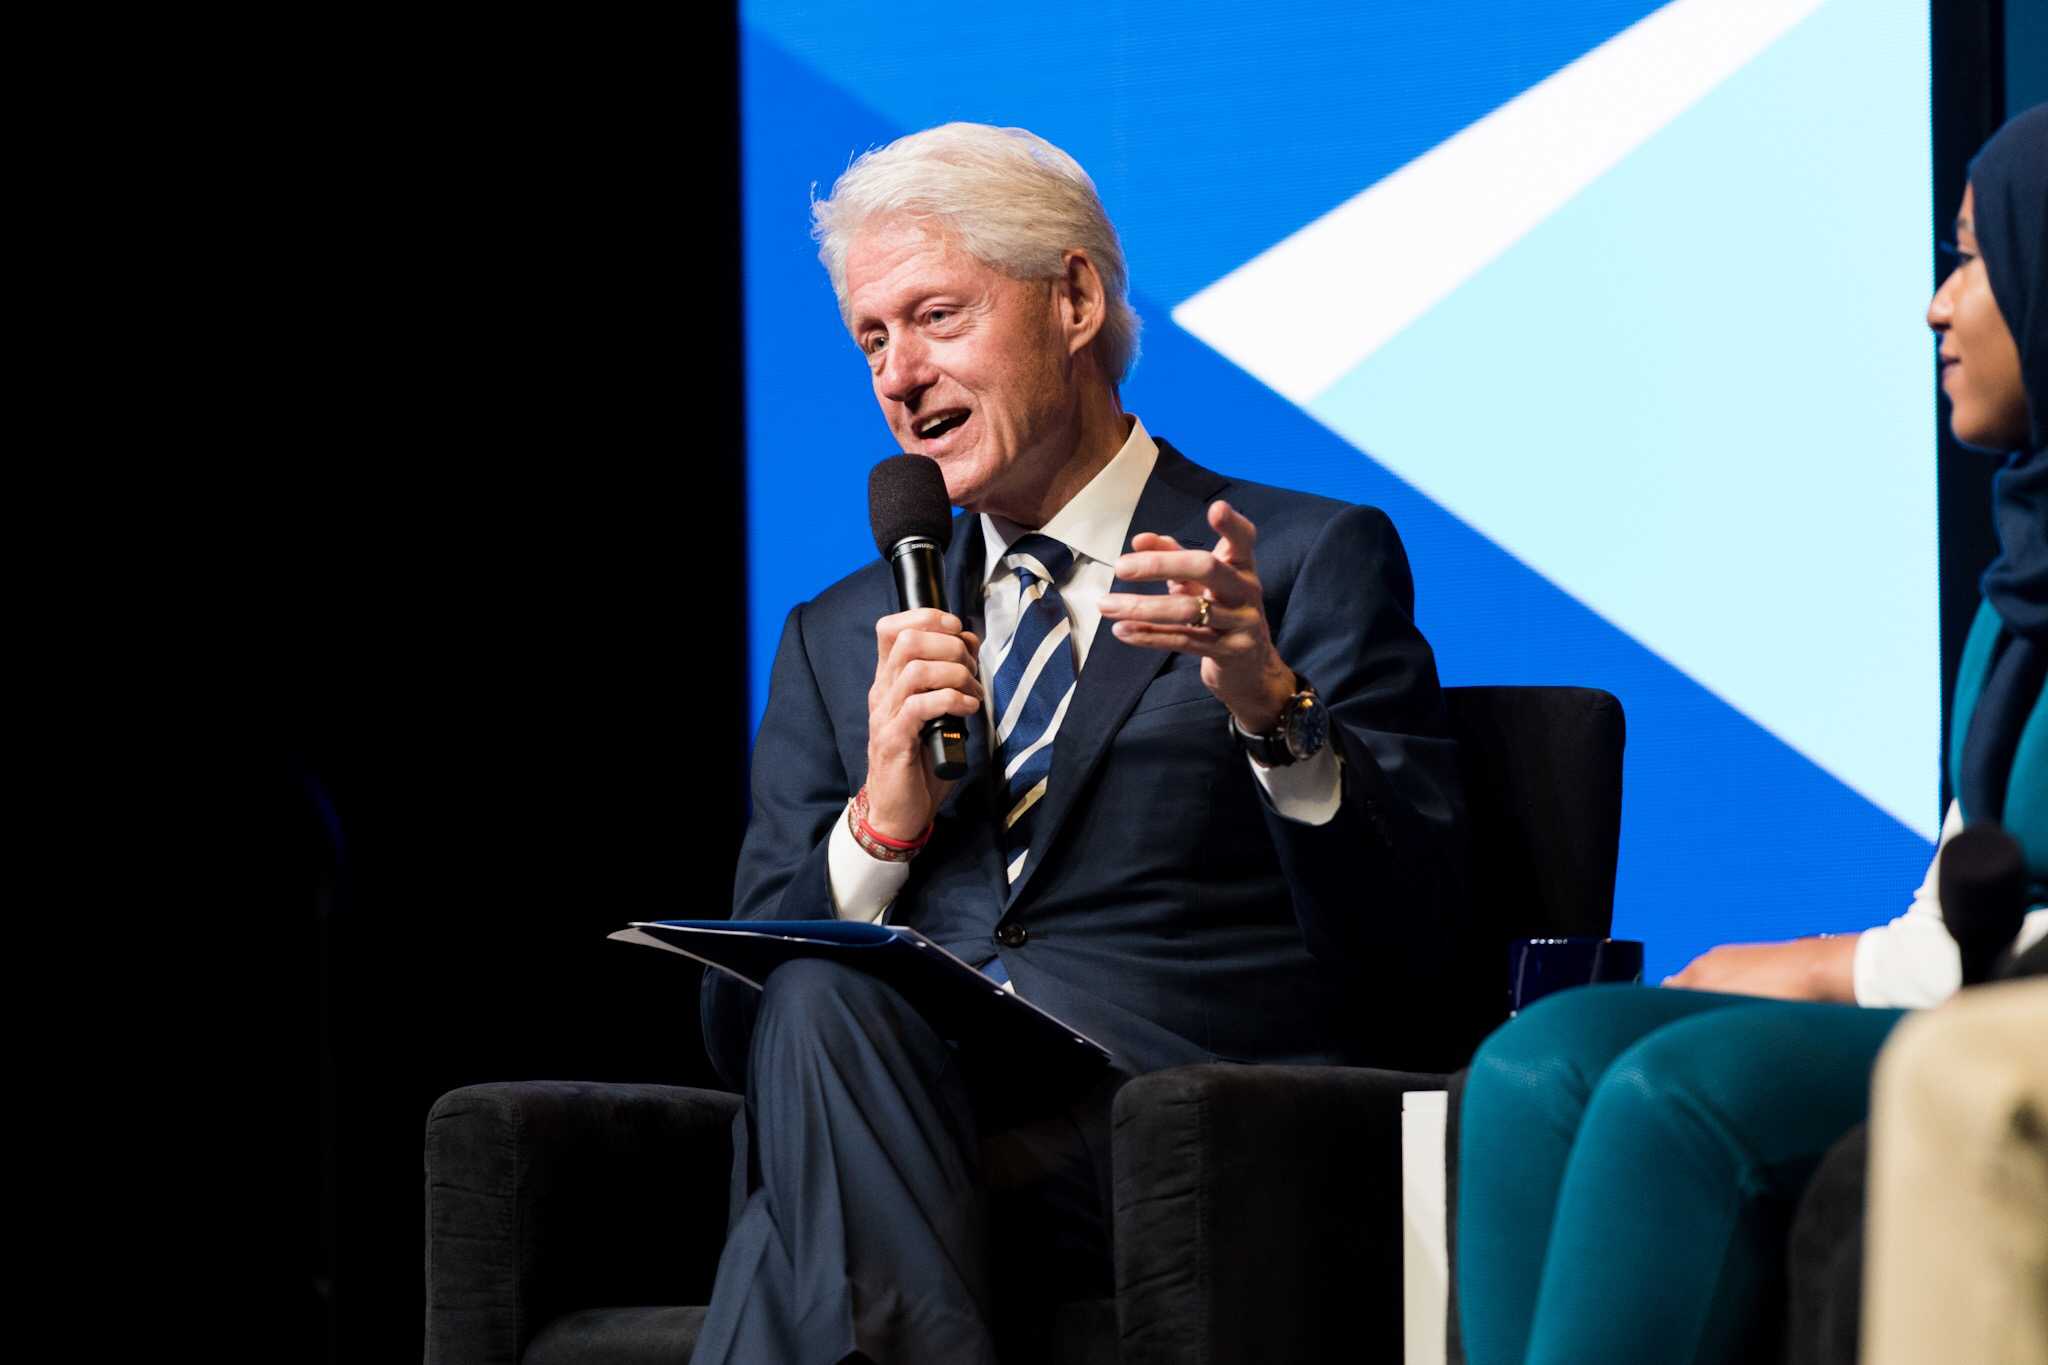 Clinton Global Initiative University continues with speeches, workshops